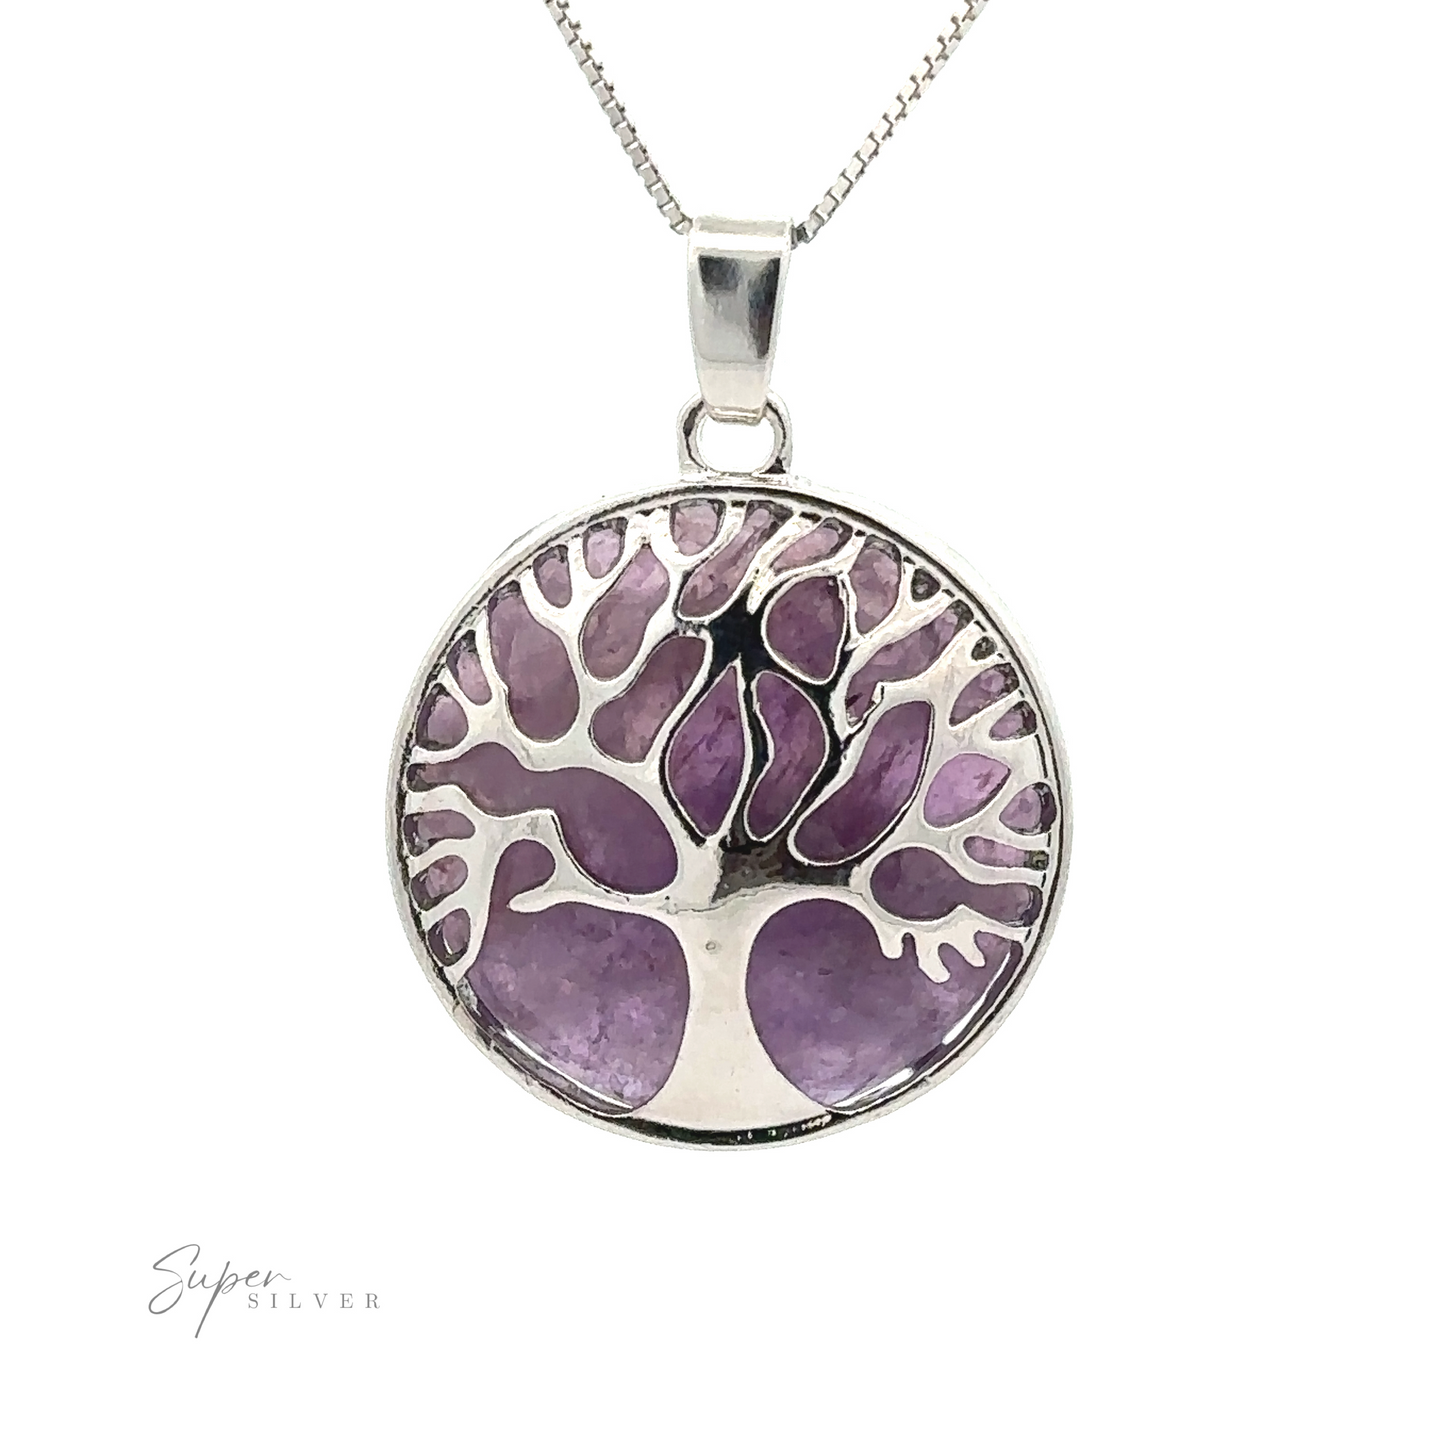 
                  
                    Tree of Life Pendant with a round Tree of Life pendant featuring a tree design overlaid on a purple background. The silver plated pendant is attached to a fine chain, with the text "Super Silver" visible on the lower left.
                  
                